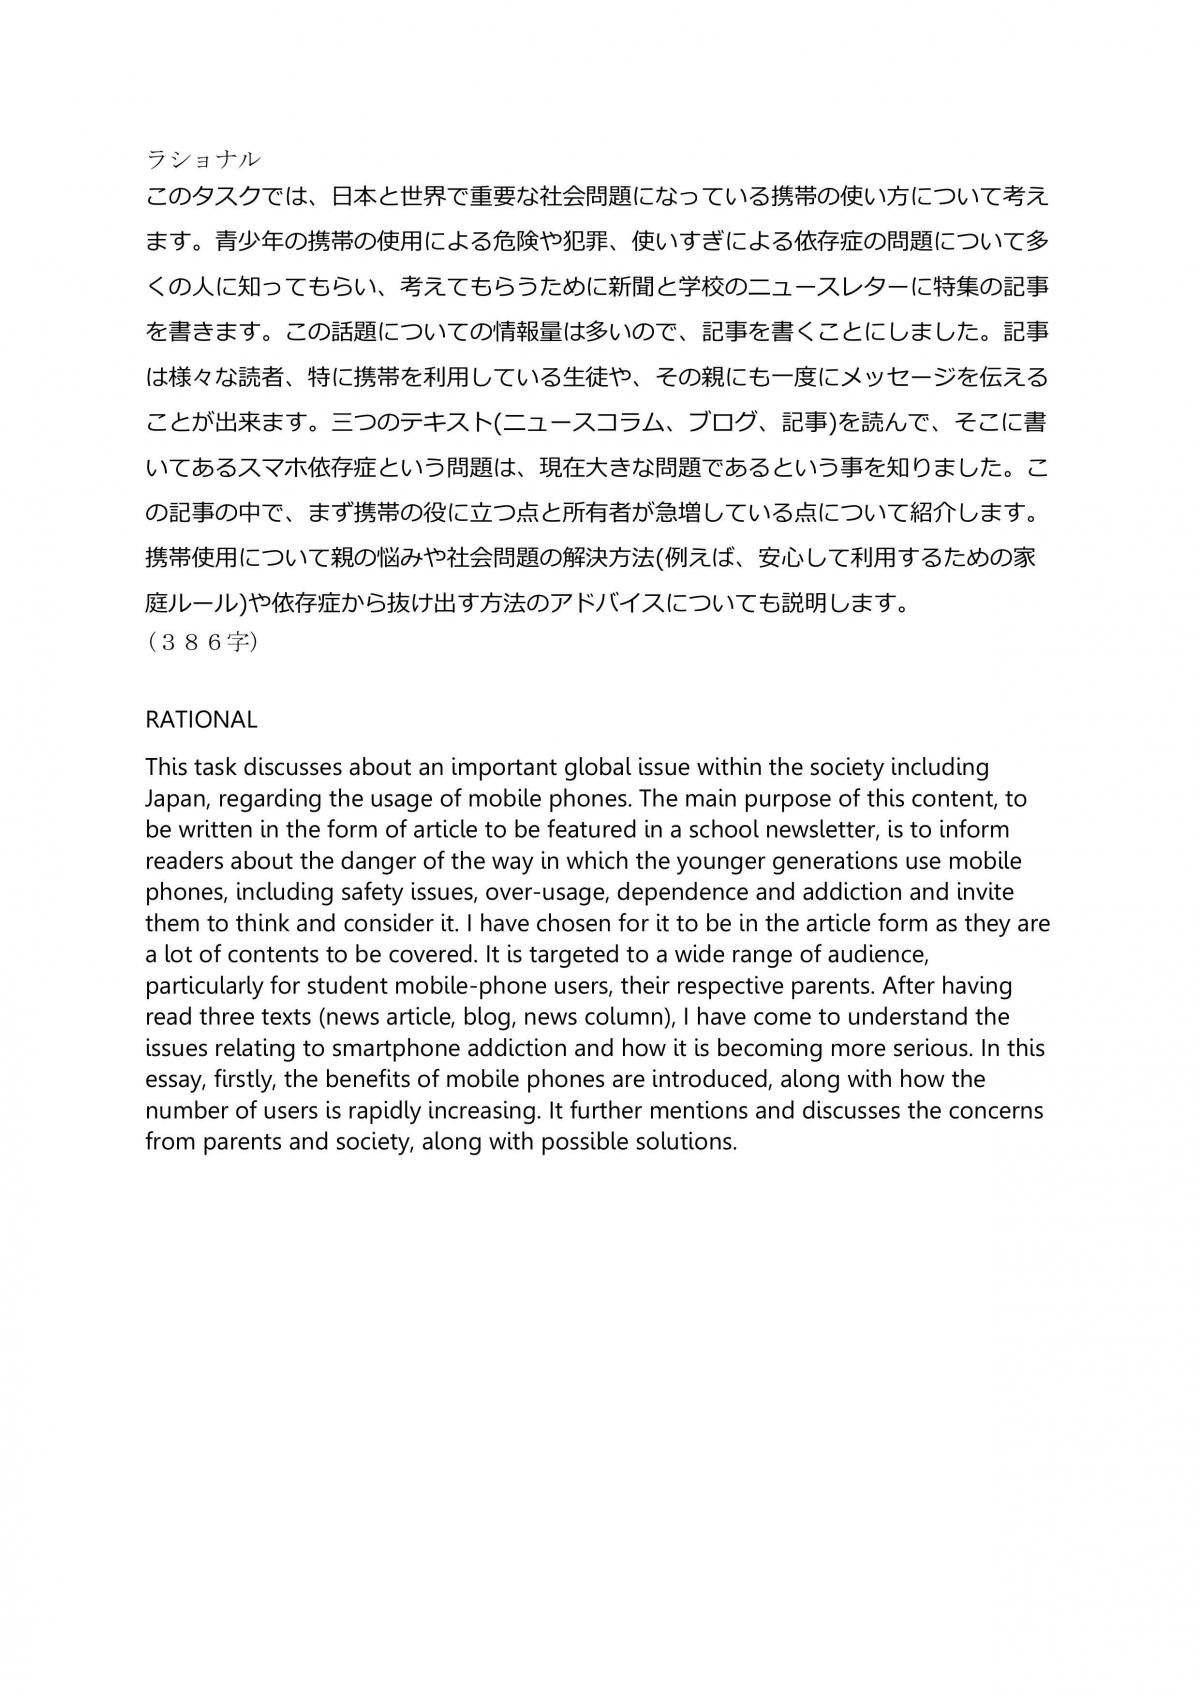 essay in japanese period